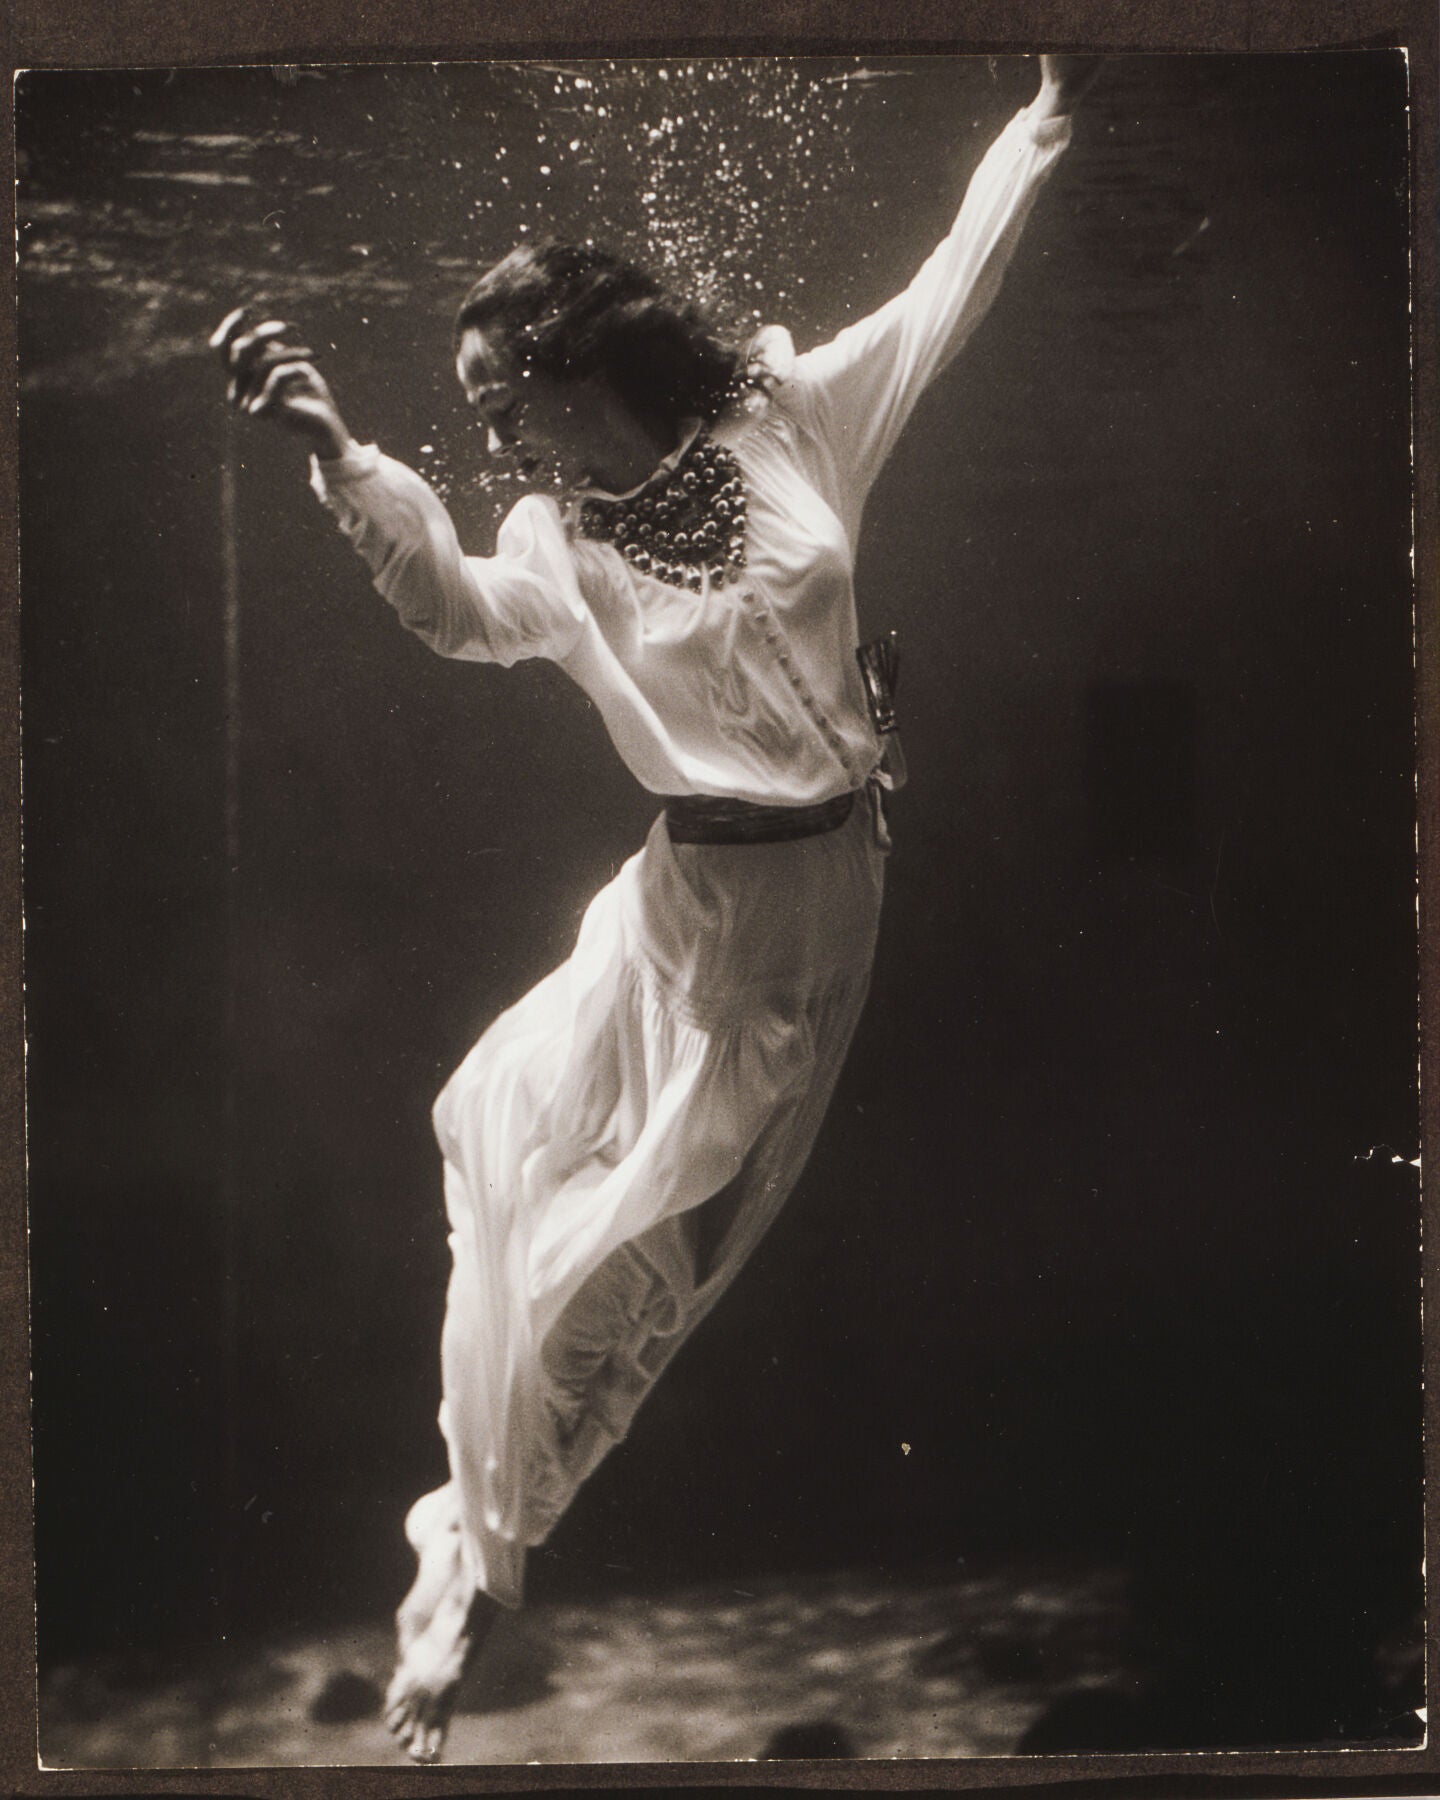 Fashion model underwater in a dolphin tank, Marineland, Florida by Toni Frissell, 1939